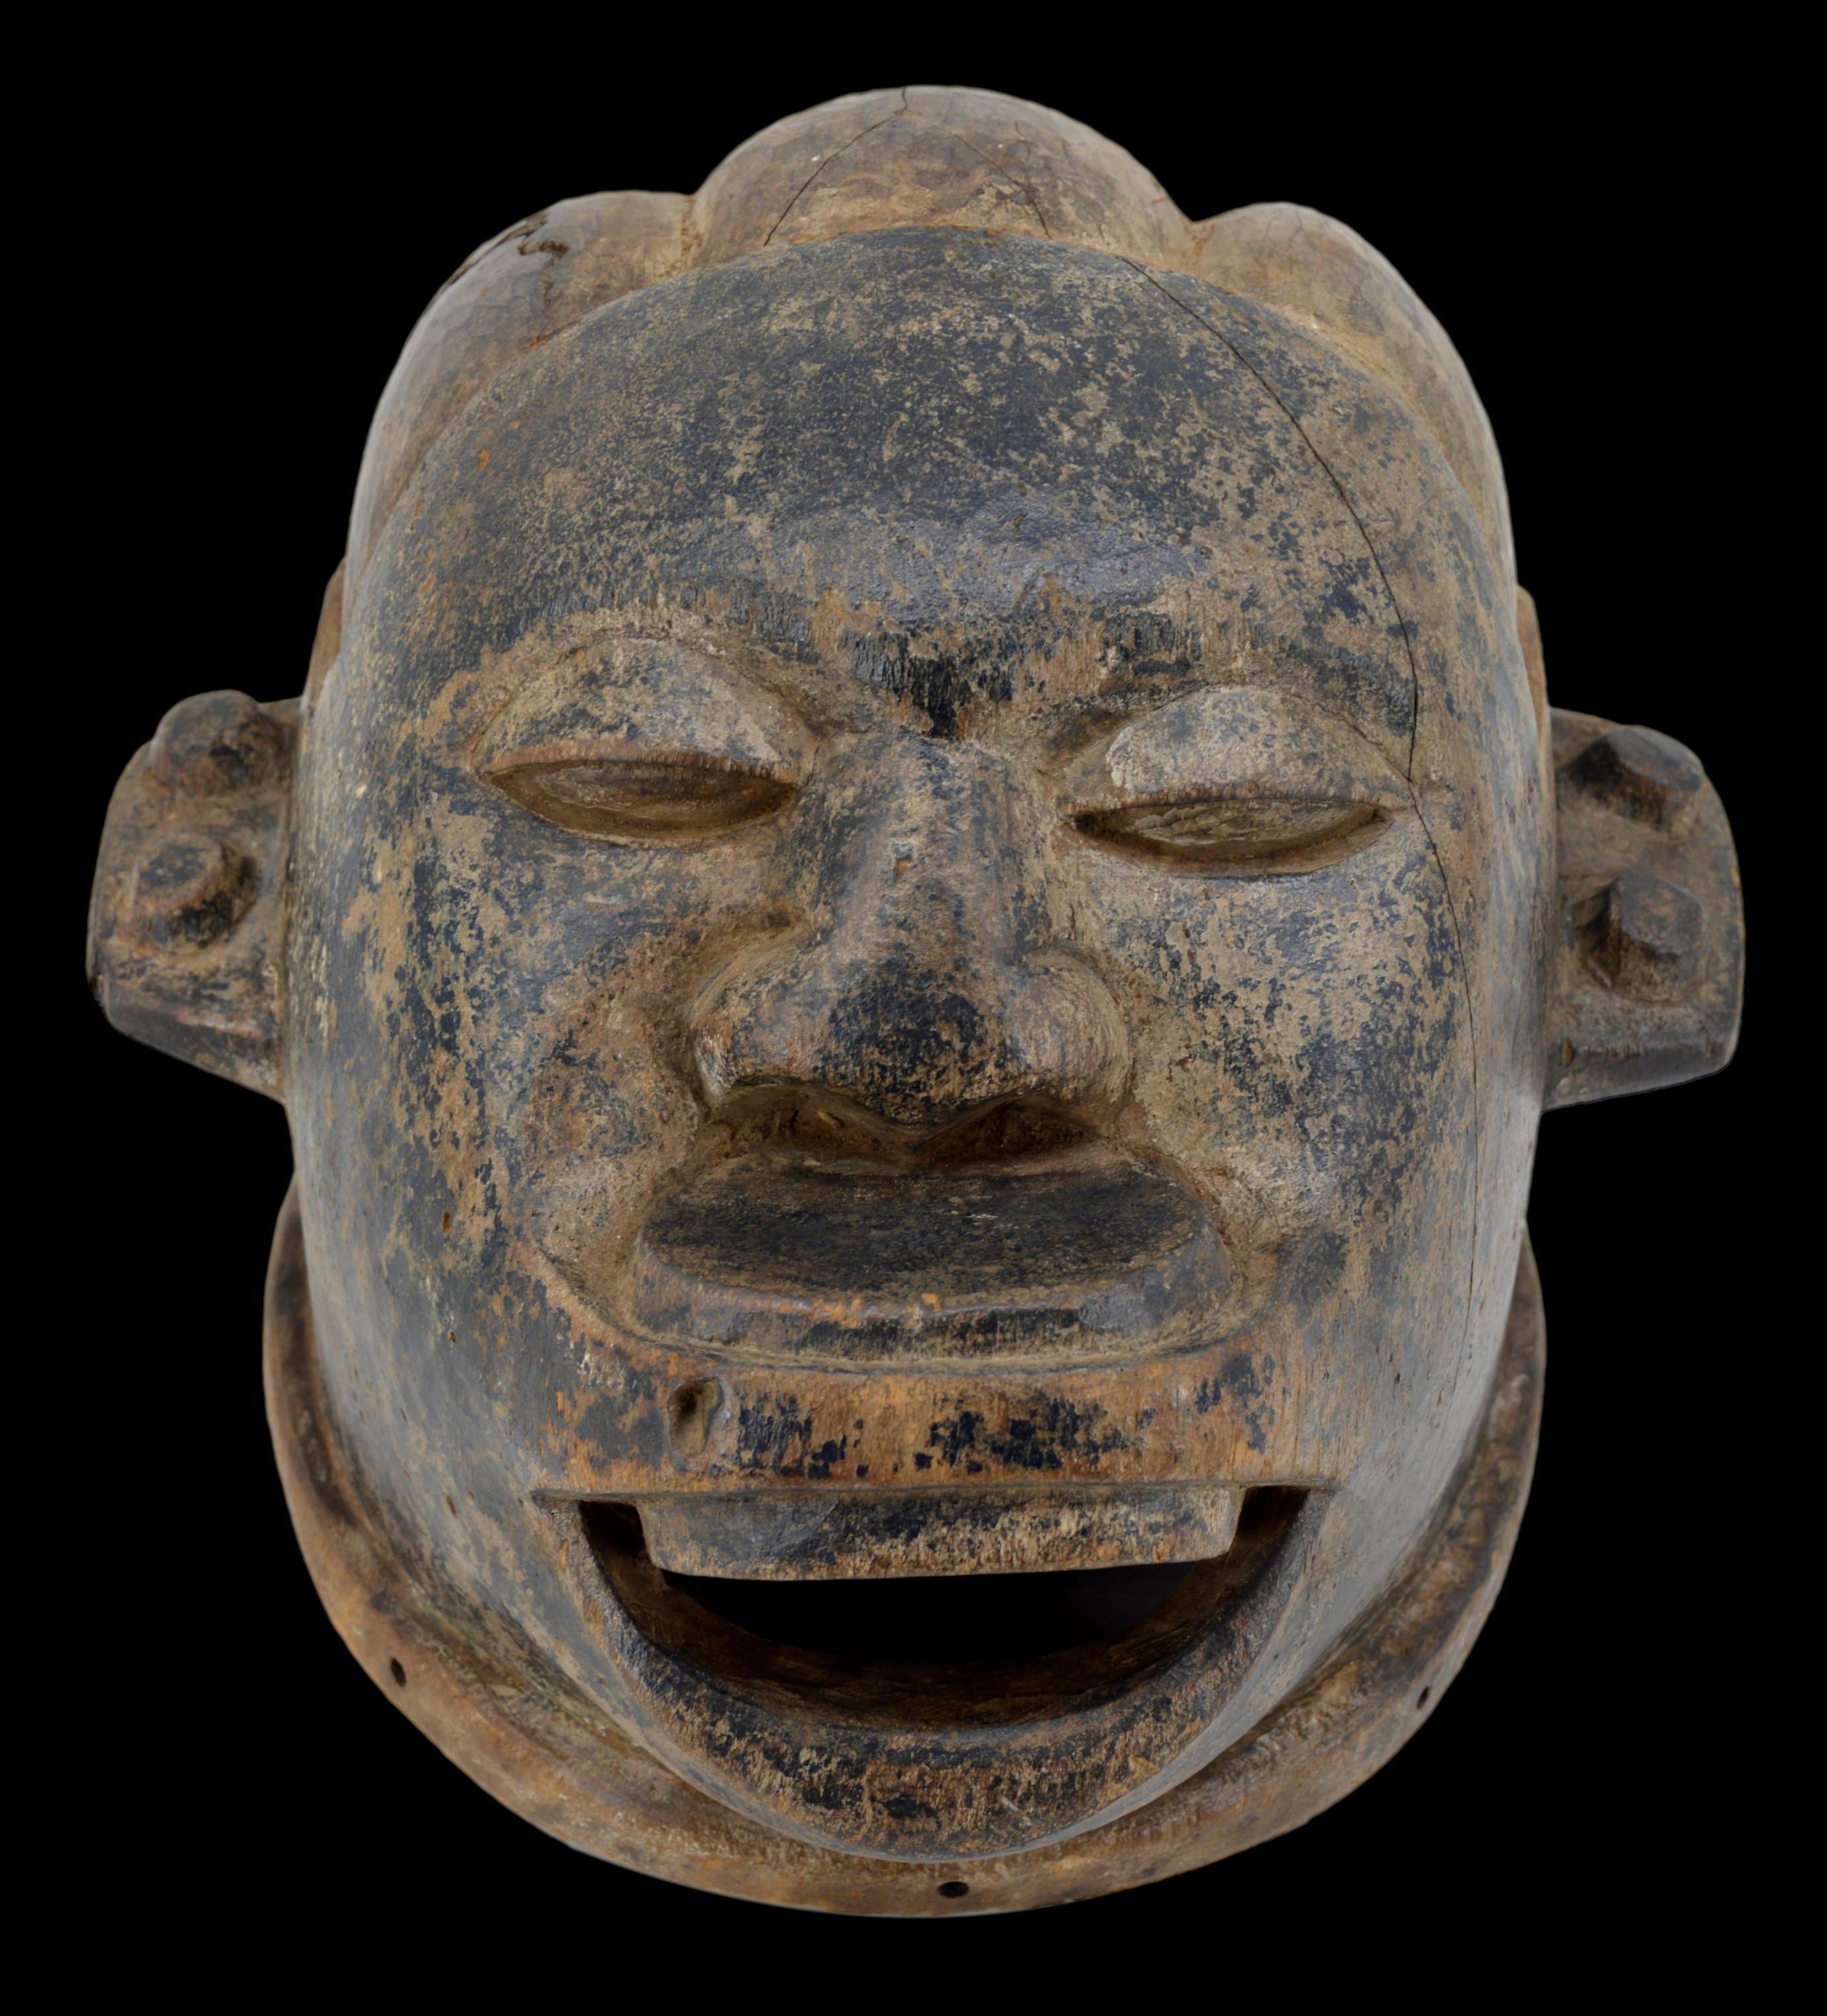 Makonde helmet mask , Tanzania, Africa, early 20th century. Woman's face with a lip plug. The young woman represented wears earrings. Her hairstyle shows three large braids which are sculpted by hand. Carved wood. Width : 11.4